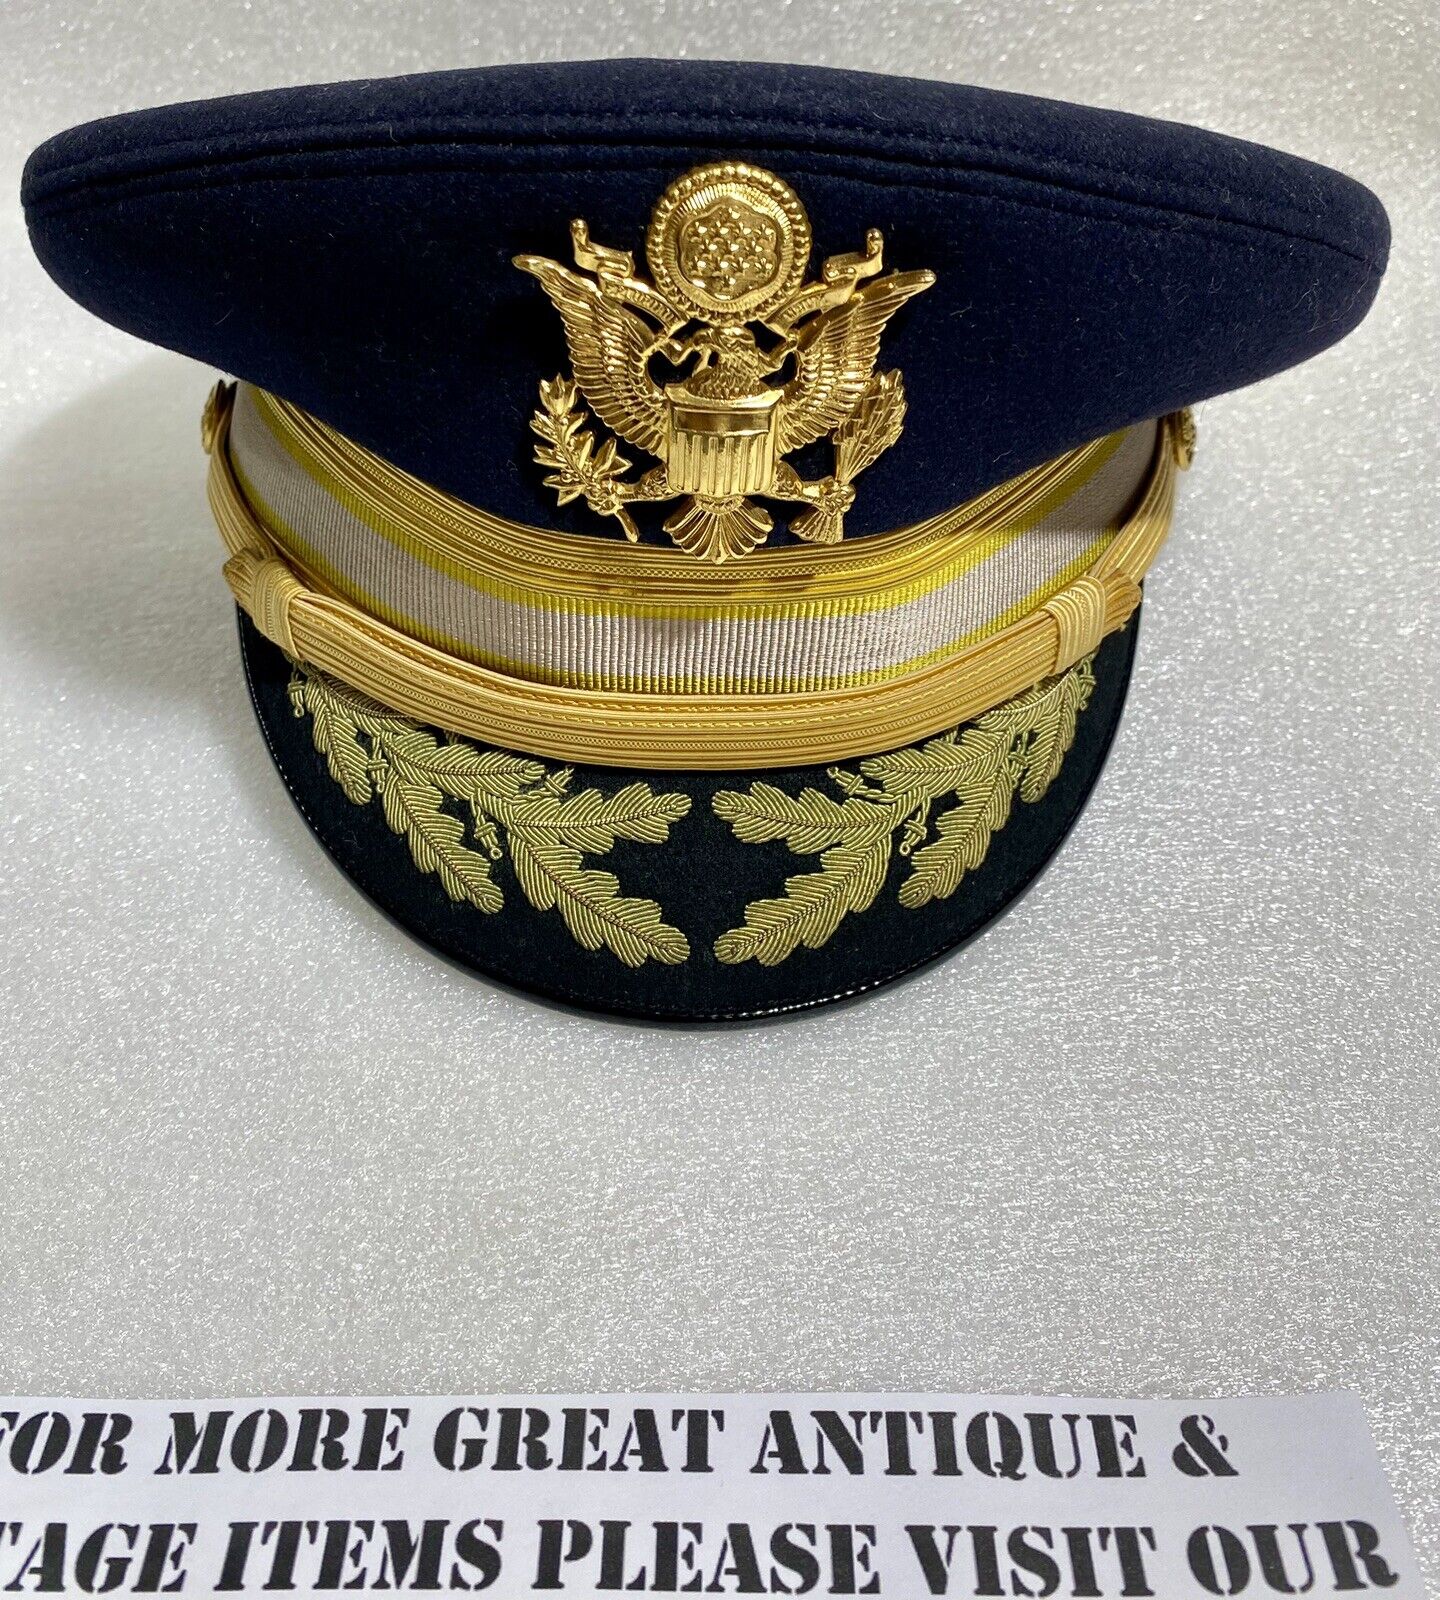 US Army Military Dress Cap Officer Major Gold Trim - Bancroft Size 7 1/4